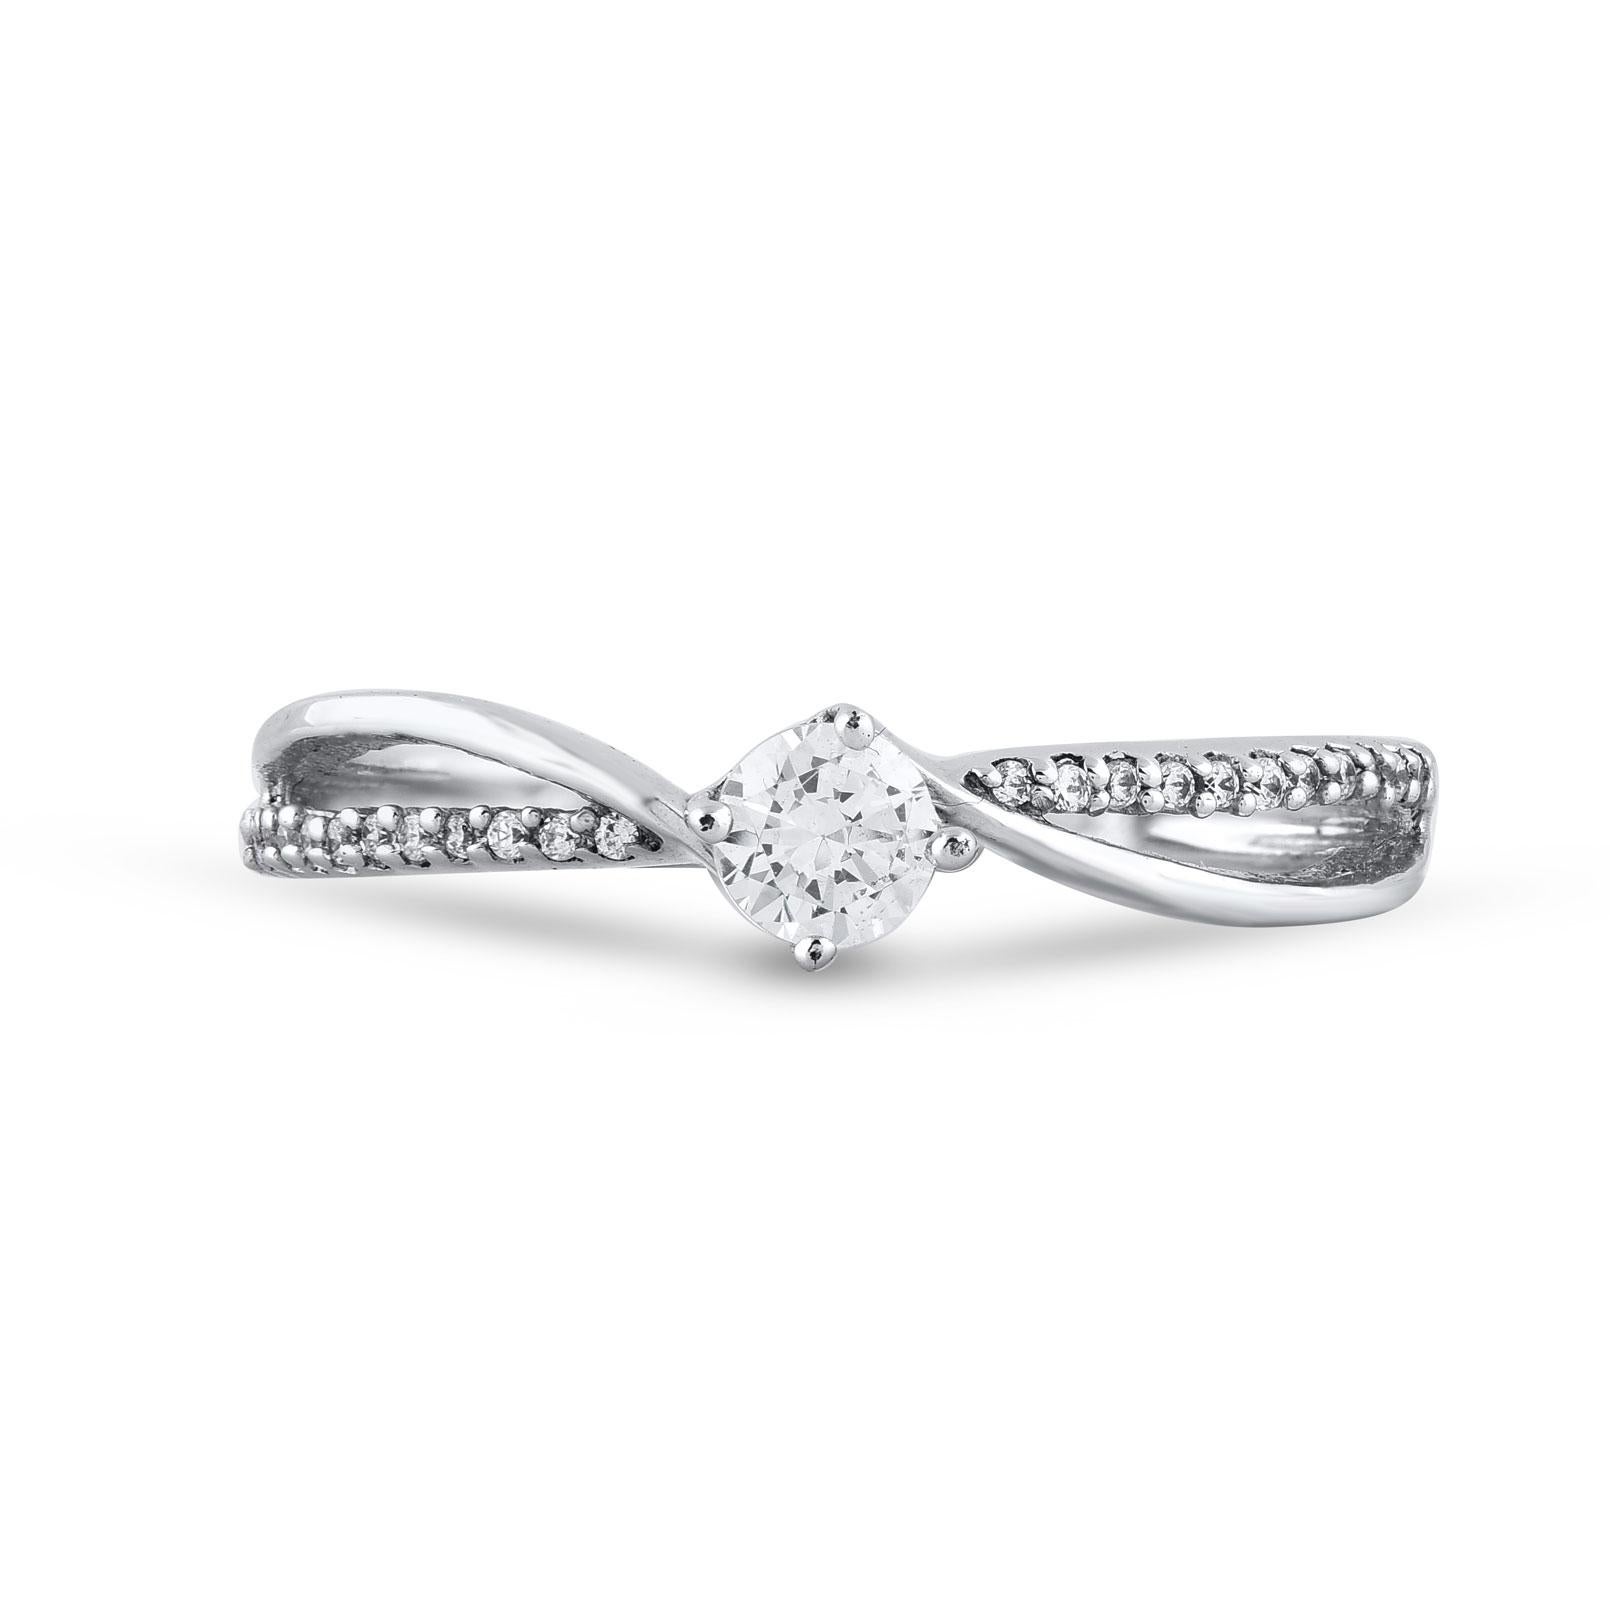 Stunning and exquisite, this diamond ring is beautifully crafted in 14K Solid White gold. This ring features 23 round brilliant-cut and single cut sparkling white diamonds set in prong setting. The diamonds are natural, not-treated and conflict-free